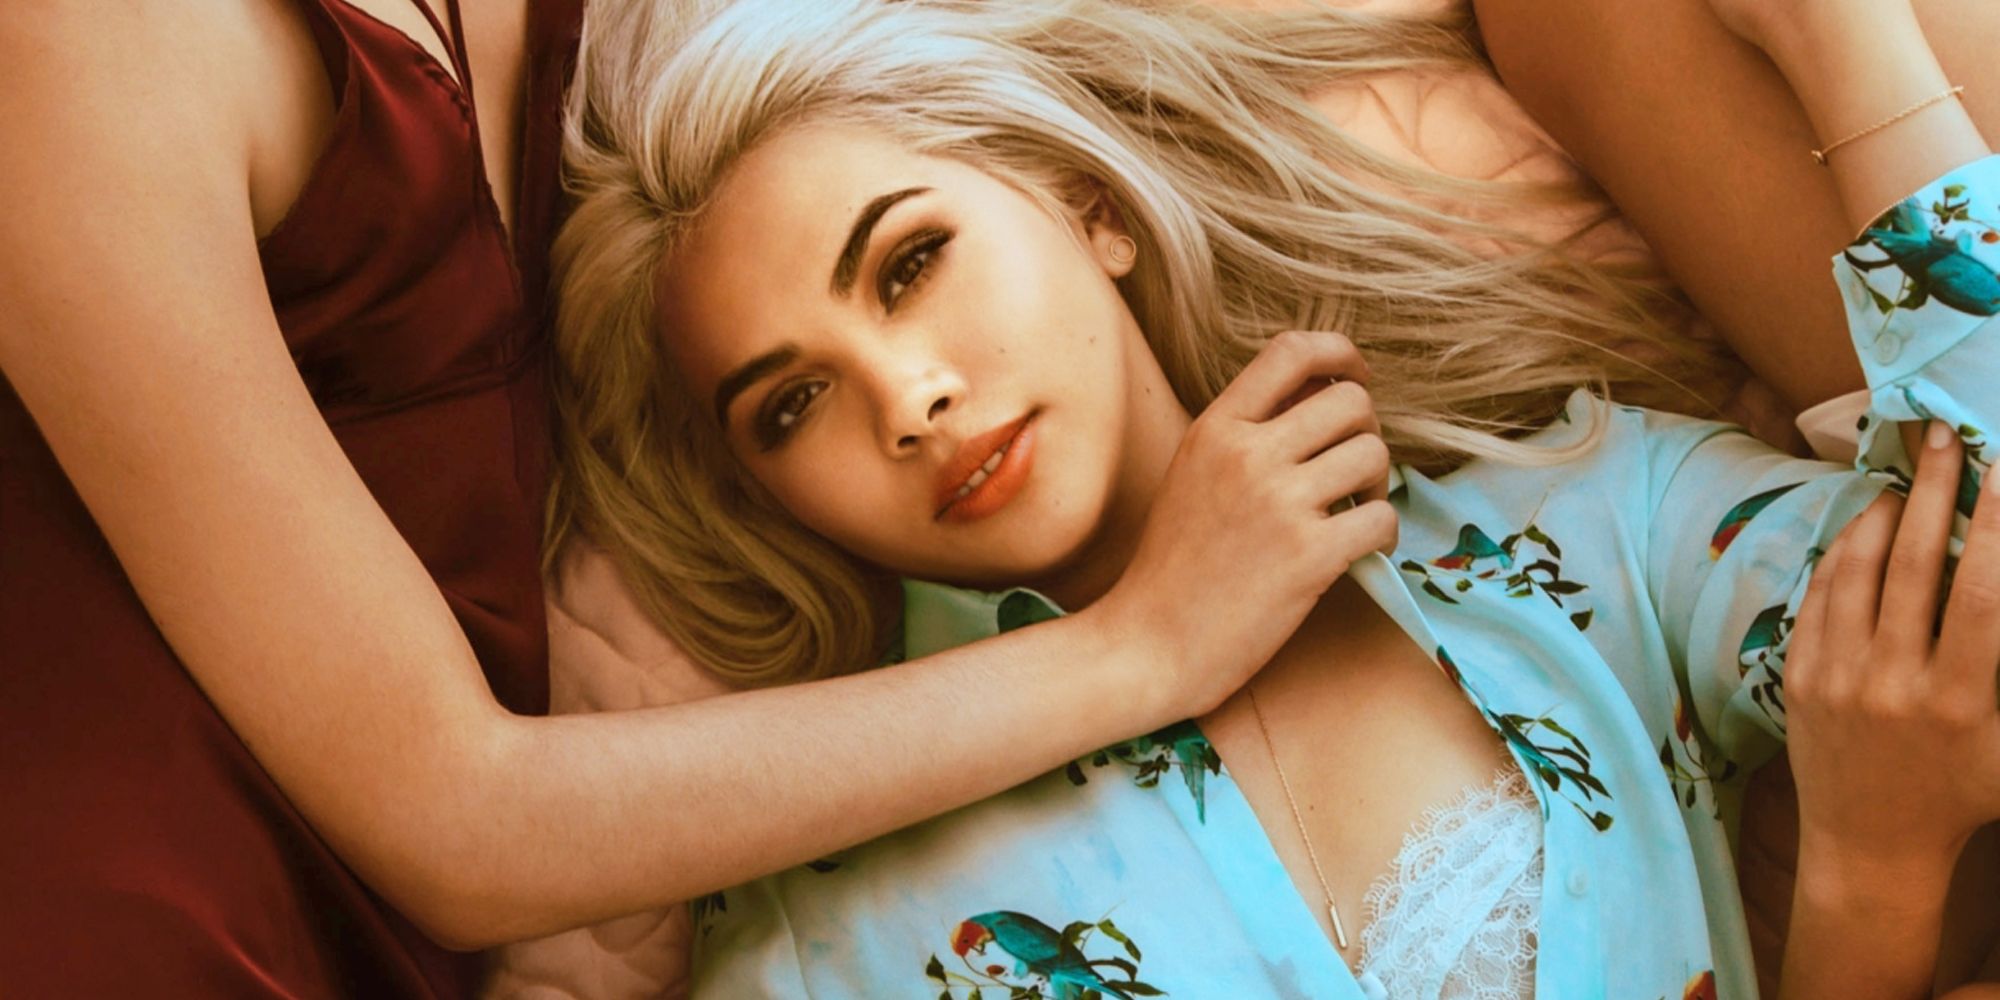 Ebony Teen Girl Threesome - Hayley Kiyoko Exclusive Interview About Insecure Guest Role - Hayley Kiyoko  About Being a Woman of Color, Artist, and Director